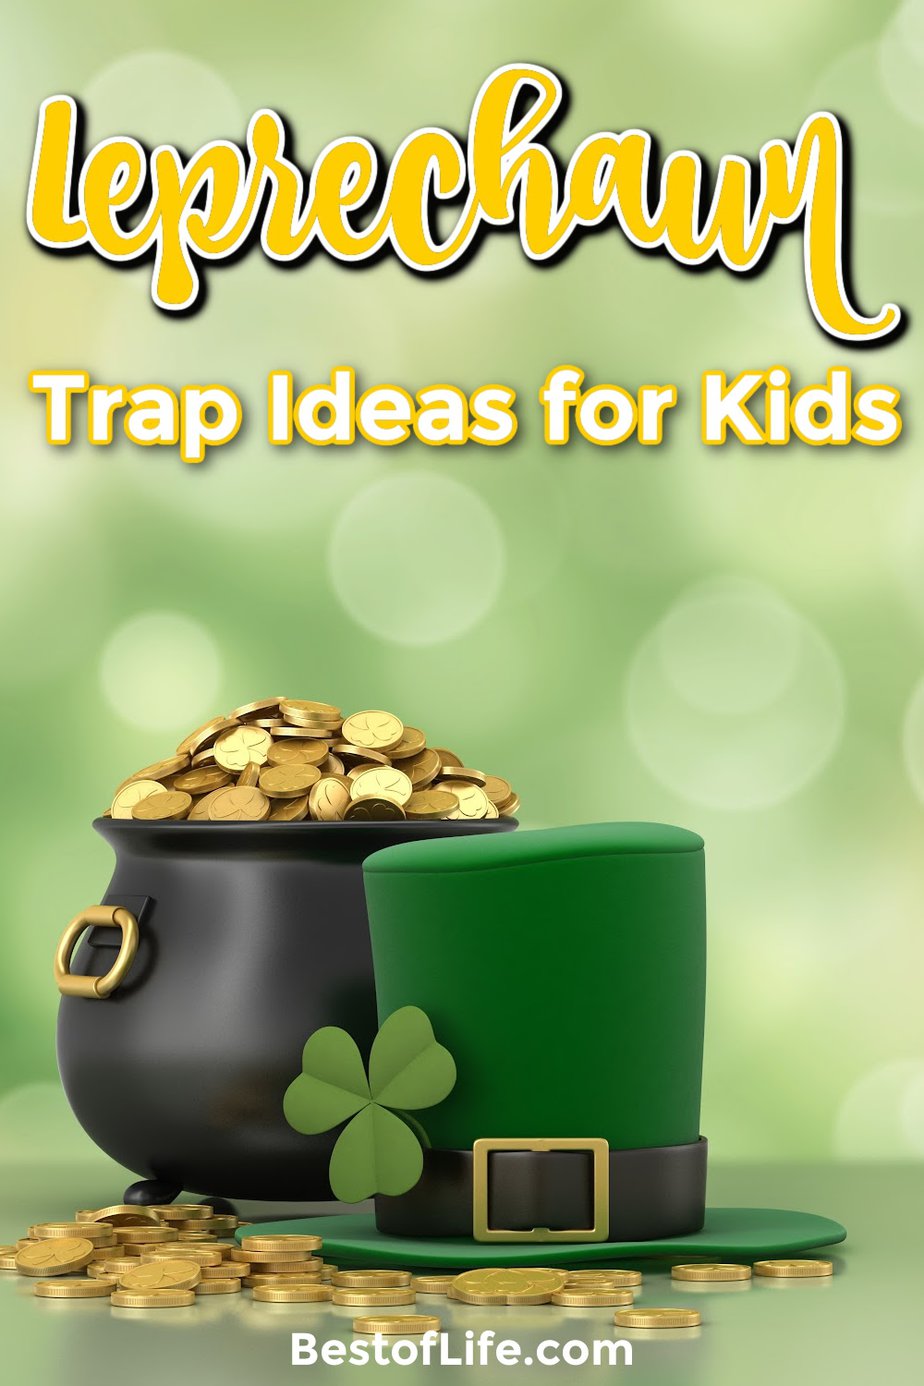 You can have a lot of St. Patrick's Day fun with your own DIY leprechaun trap ideas for kids and find new ways to celebrate St. Patrick's Day. St Patrick’s Day Idea | St Patrick’s Day Activities | DIY St Patrick’s Day Ideas for Kids | Kids Activities | Leprechaun Ideas Trap #stpatricksday #DIY via @thebestoflife